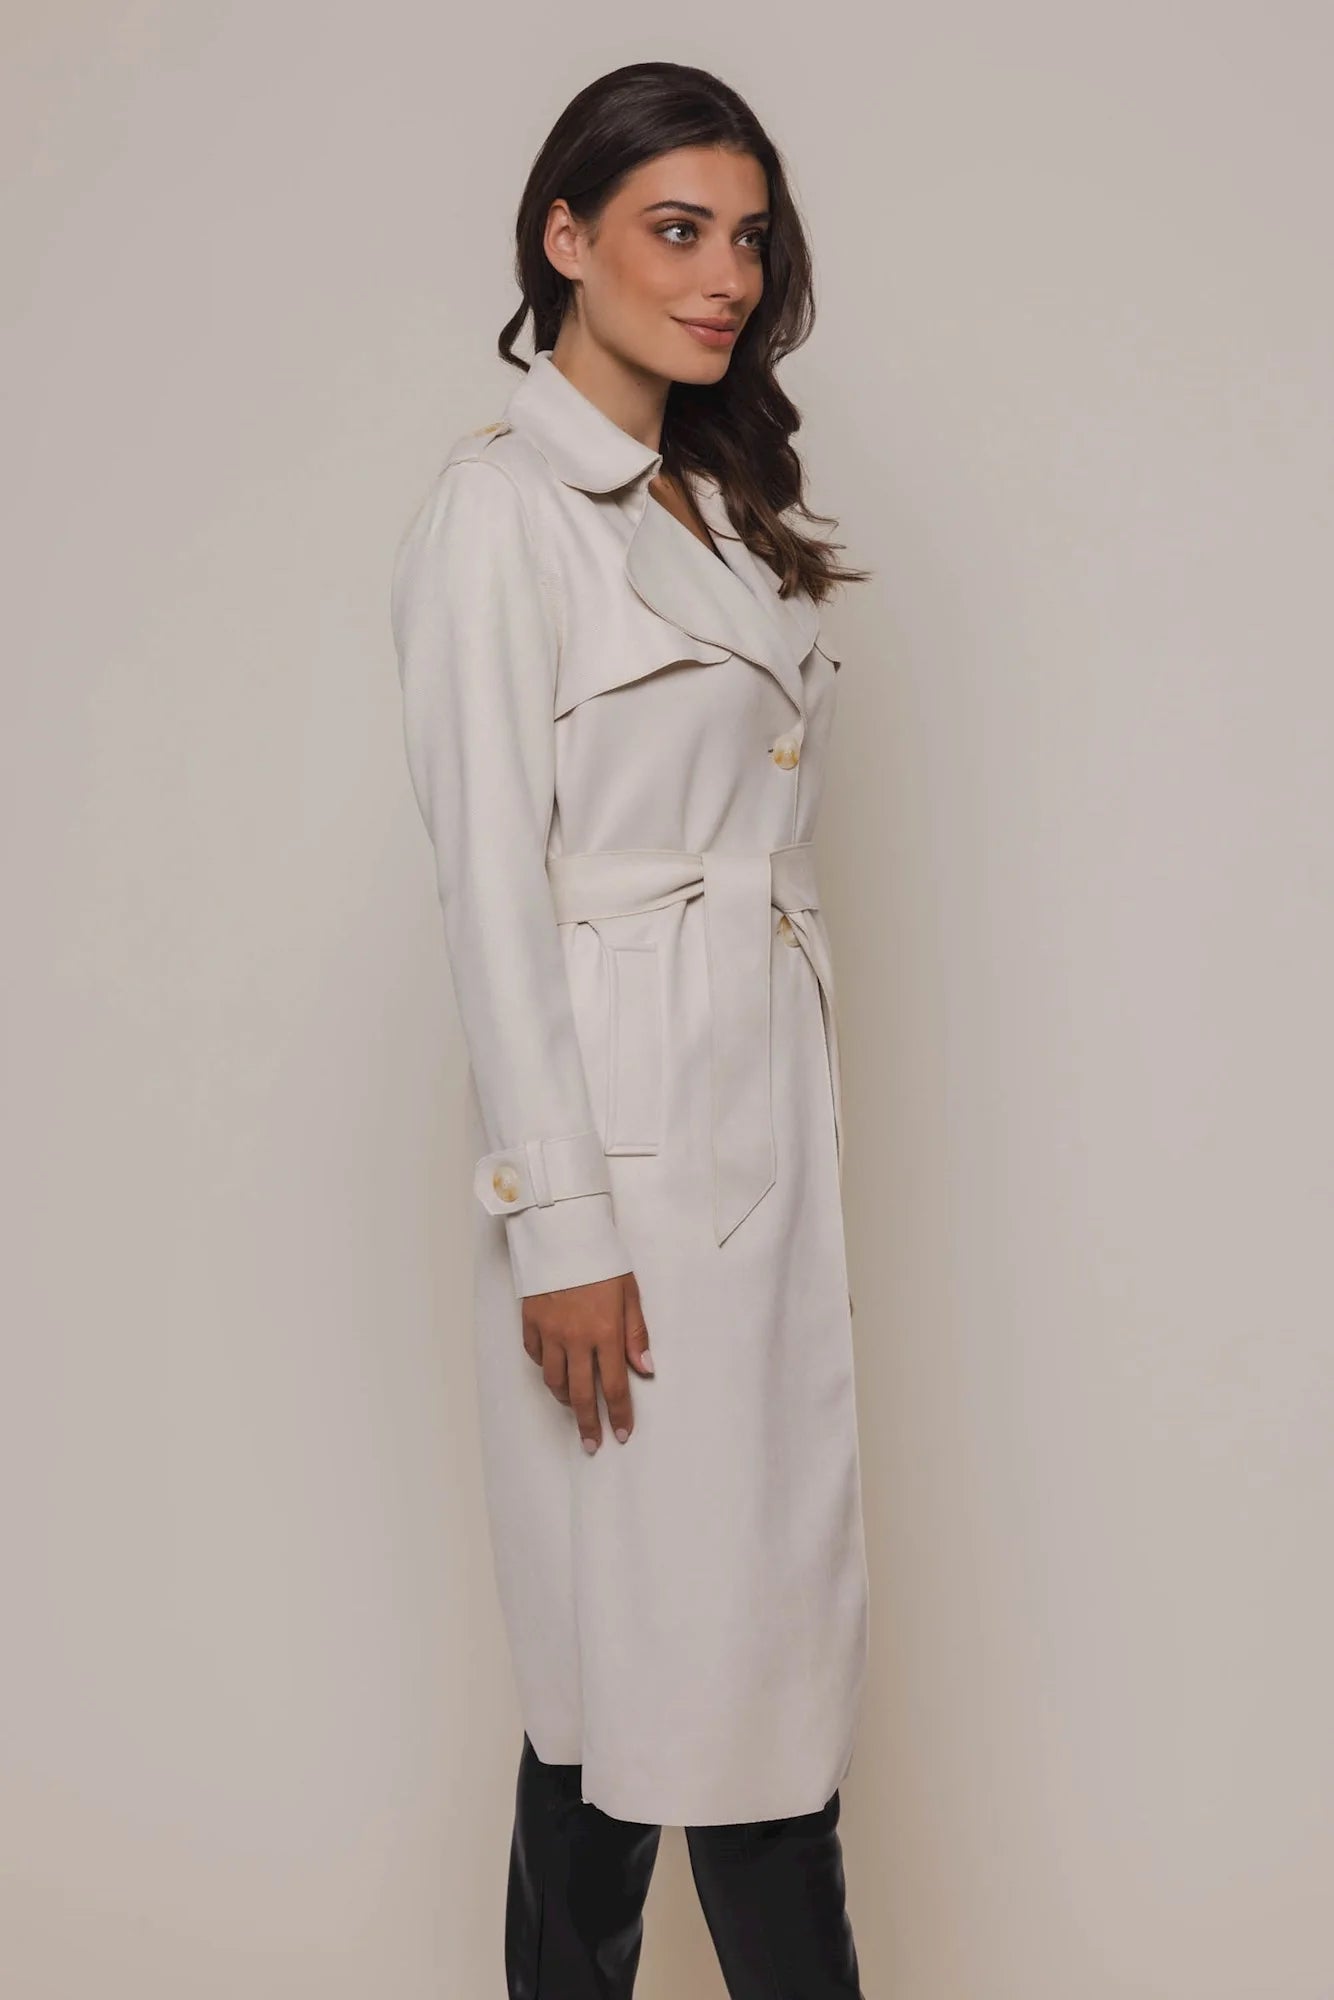 Nula Trench Coat by Rino & Pelle - Blue Sky Fashions & Lingerie